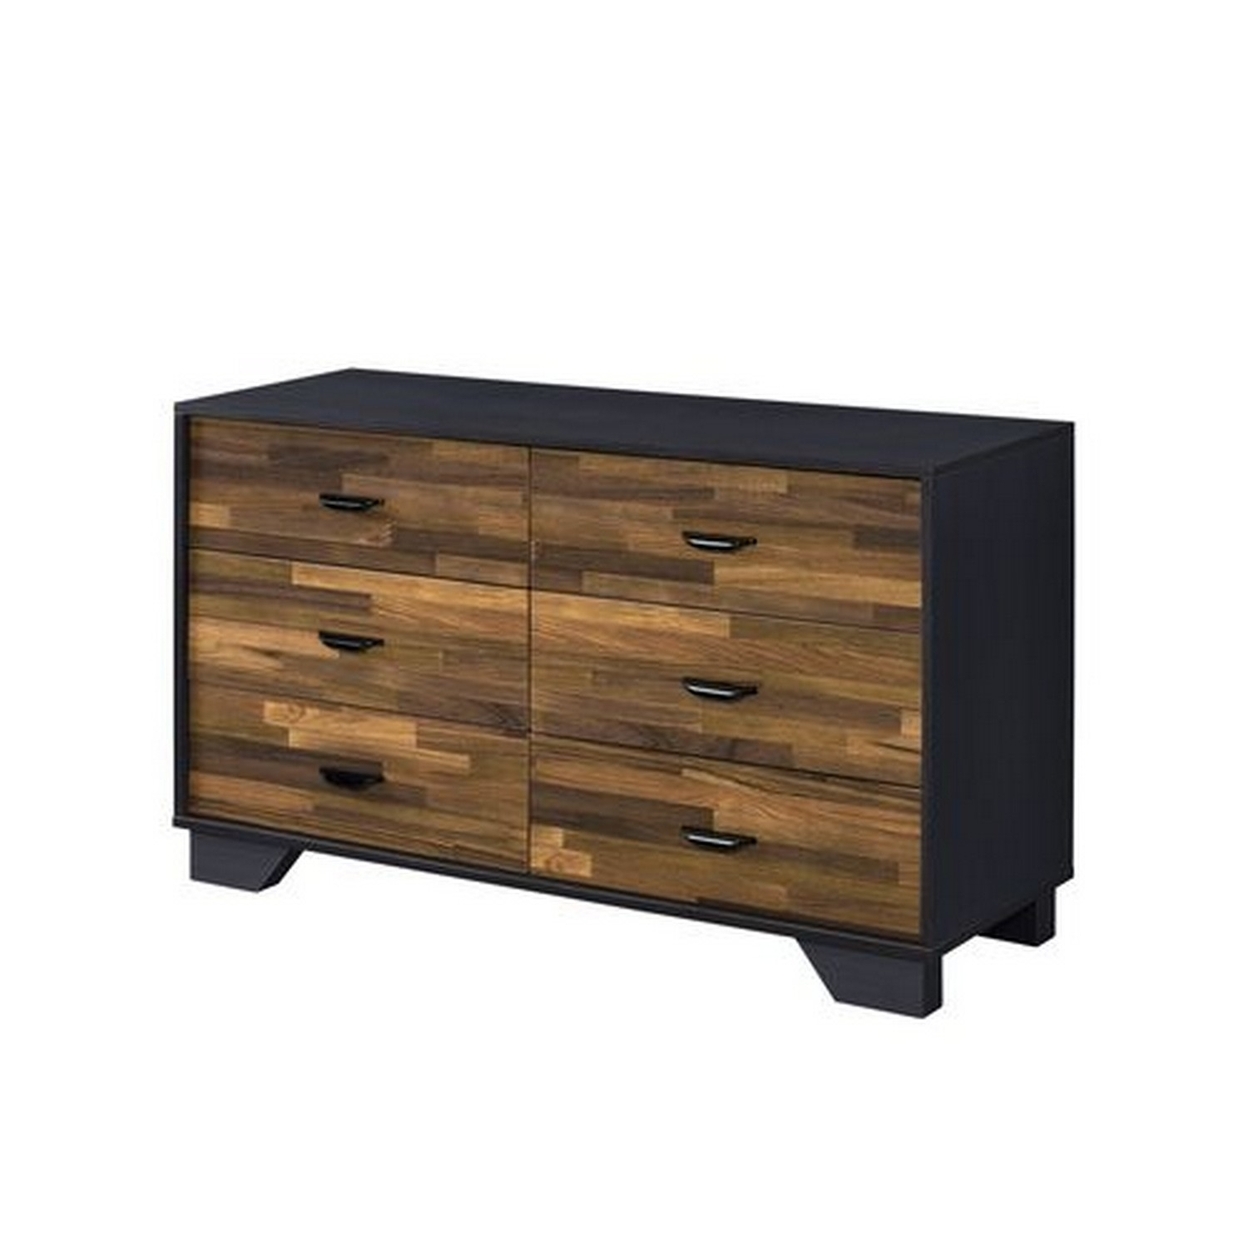 Dresser With 6 Drawers And Butcher Block Pattern, Brown And Gray- Saltoro Sherpi